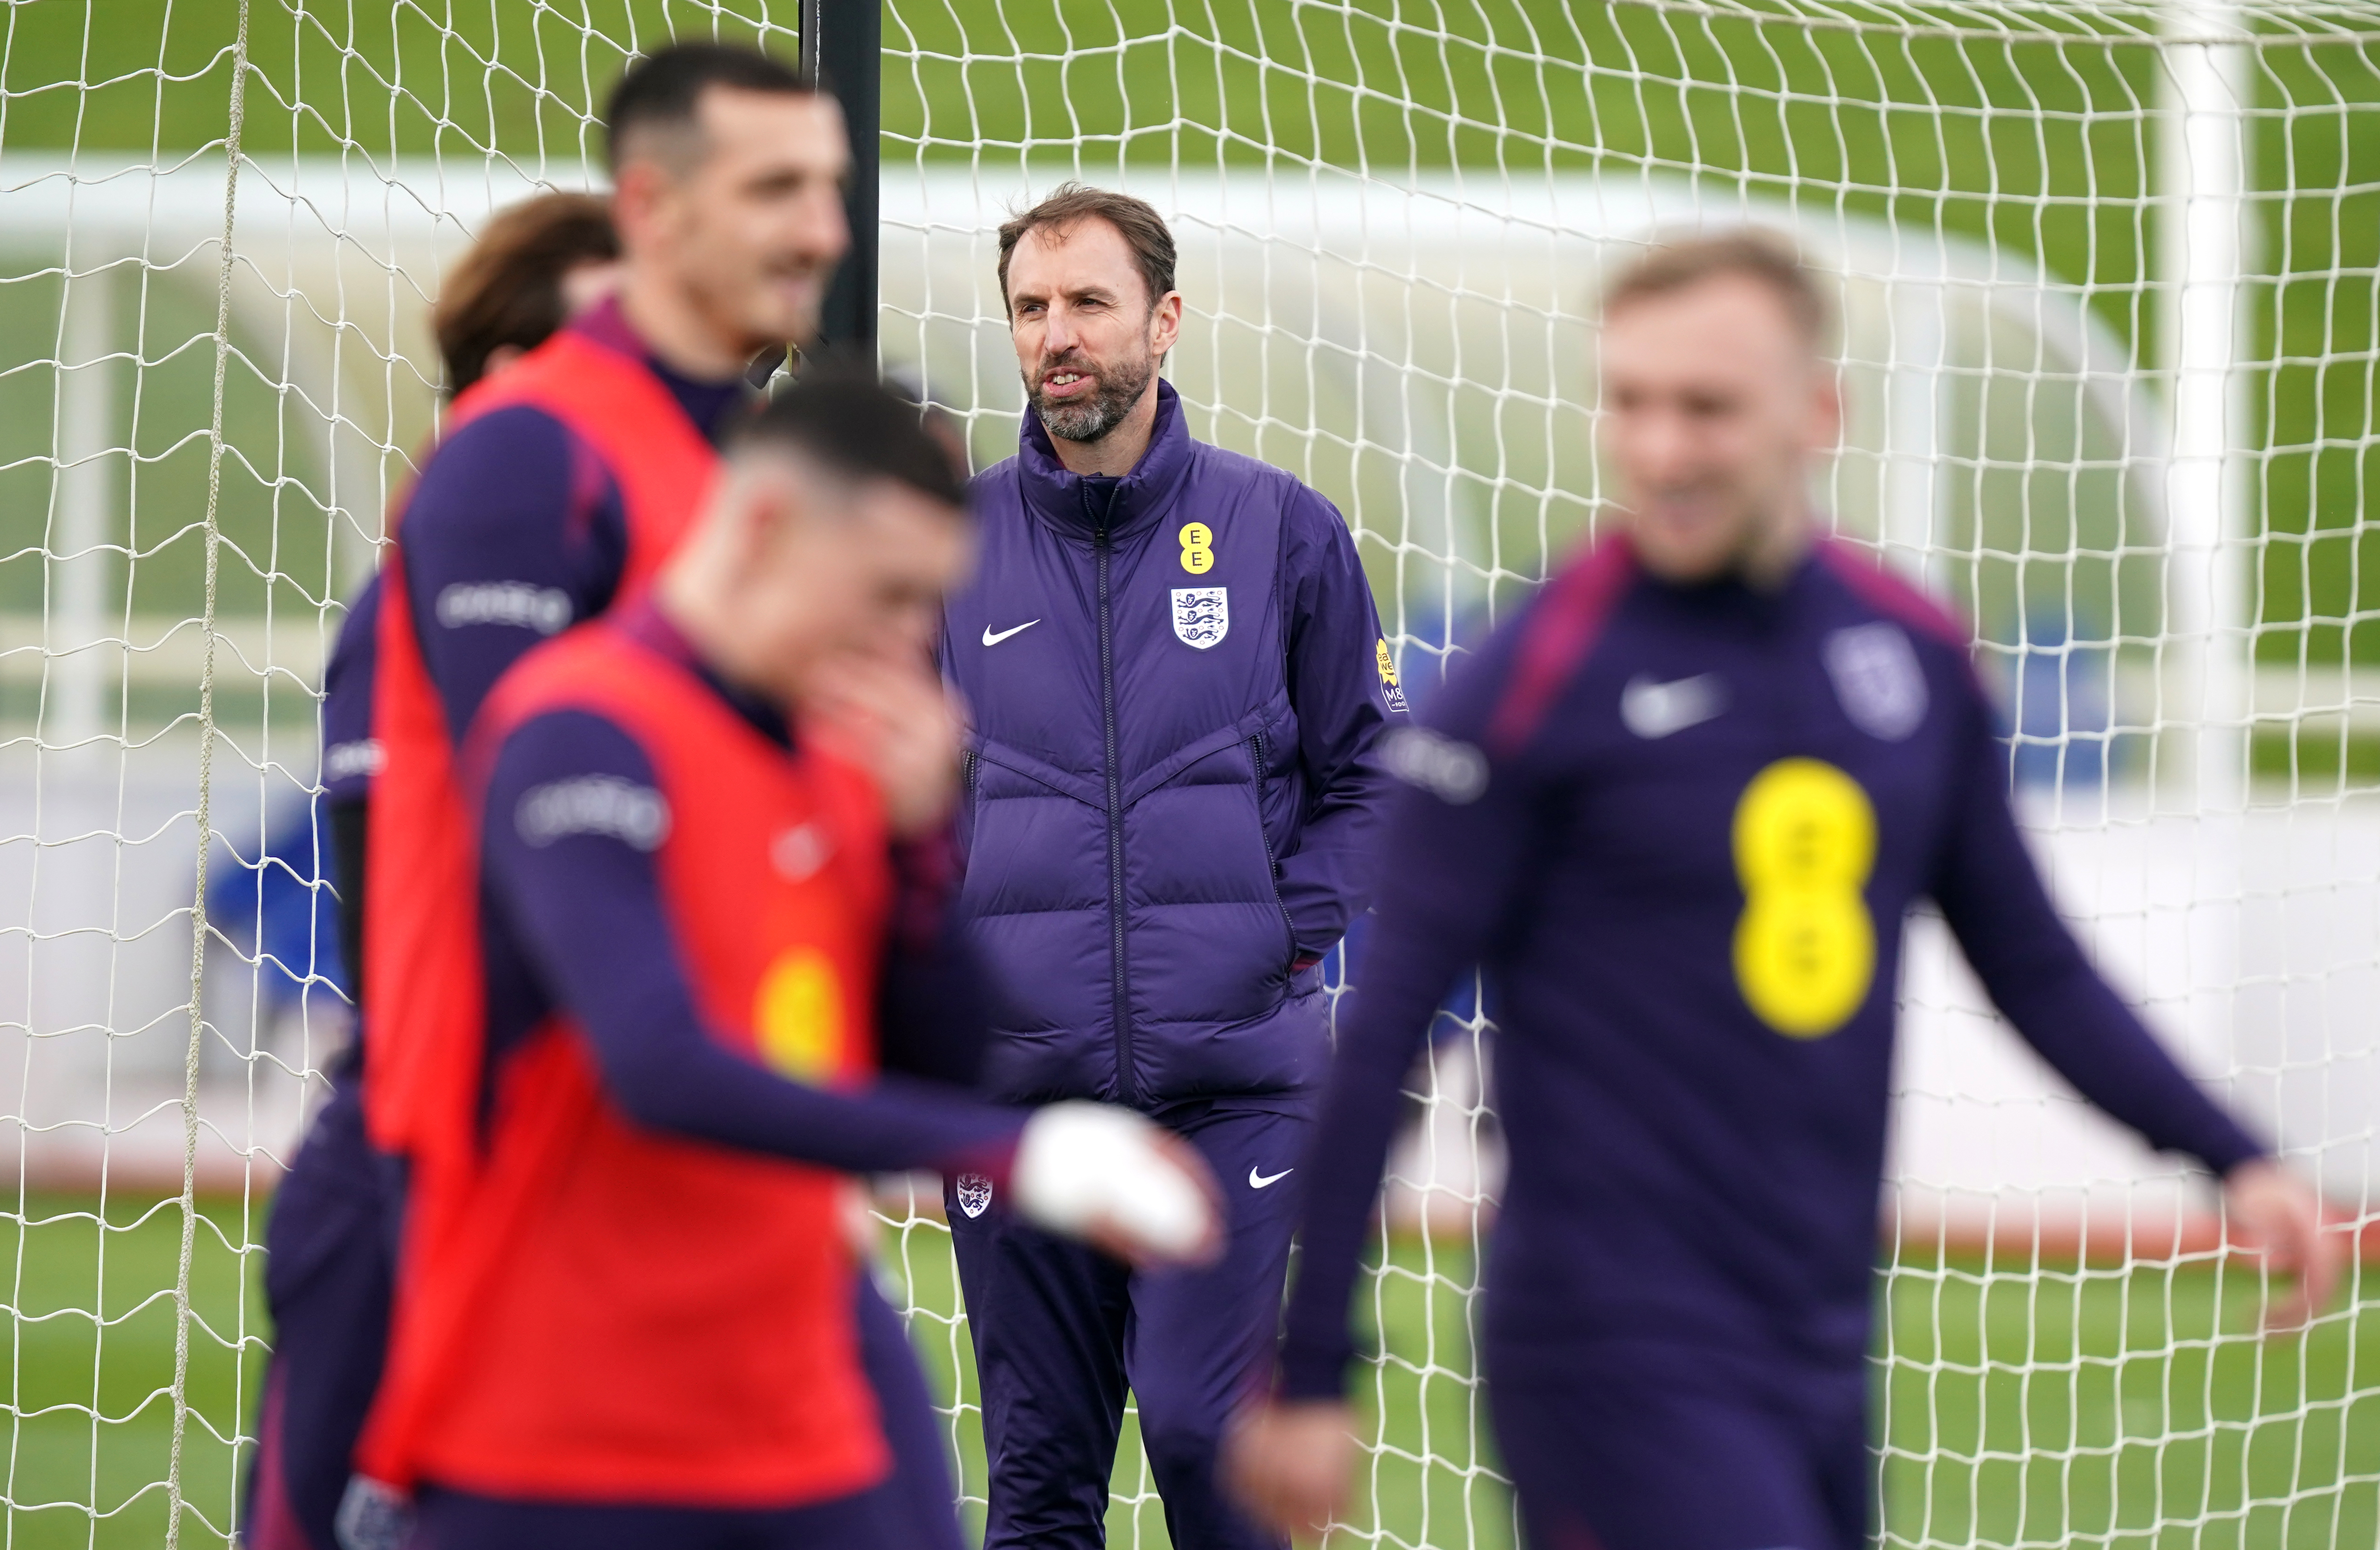 Gareth Southgate has plenty of goals in his potential England squad